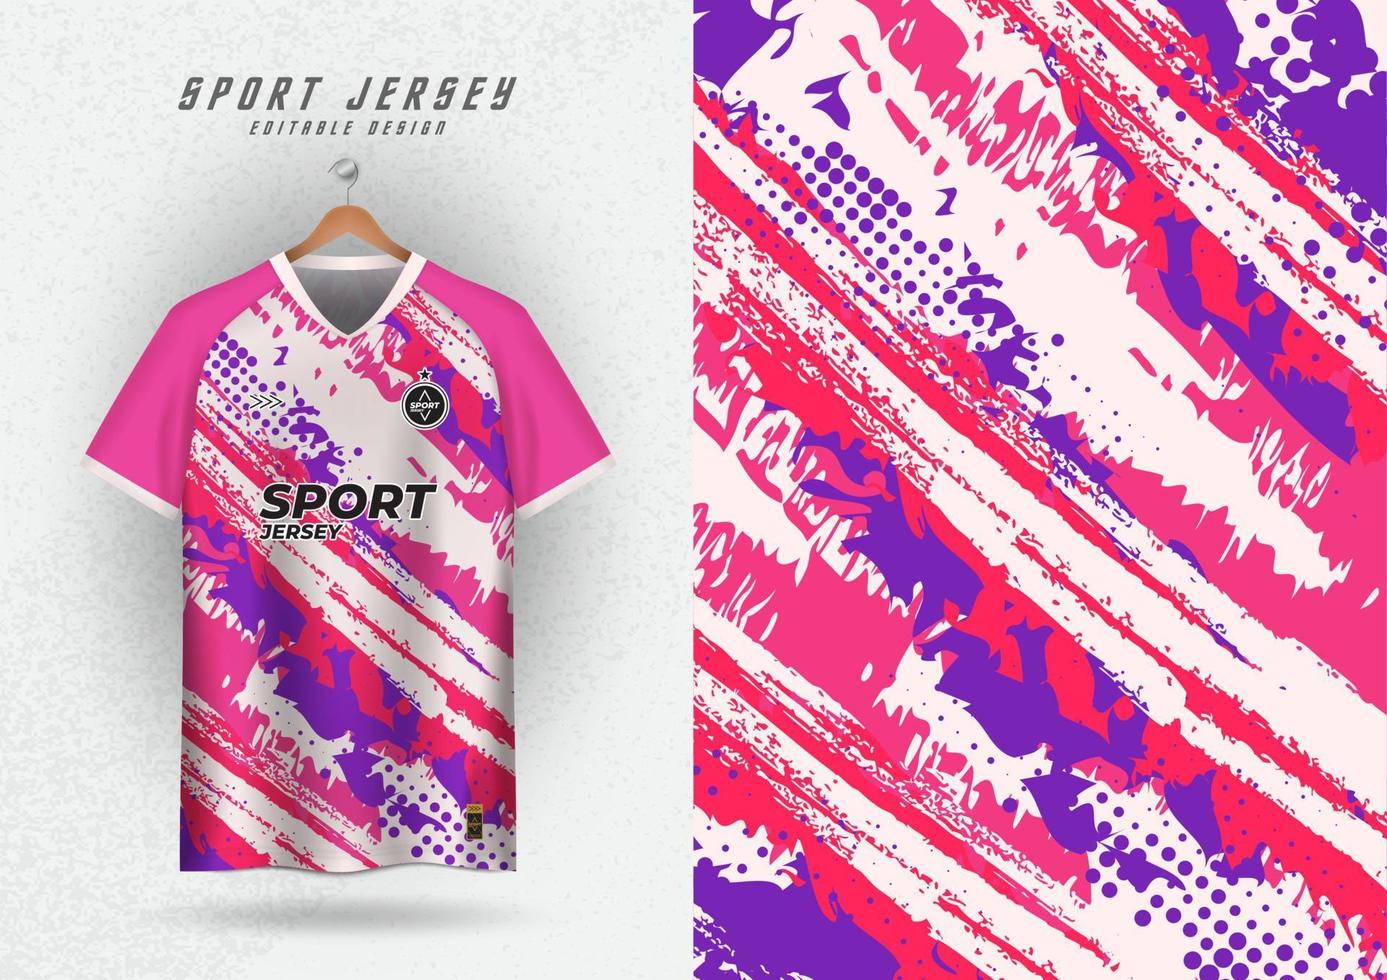 background for sports jersey soccer jersey running jersey racing jersey pattern pink white purple vector